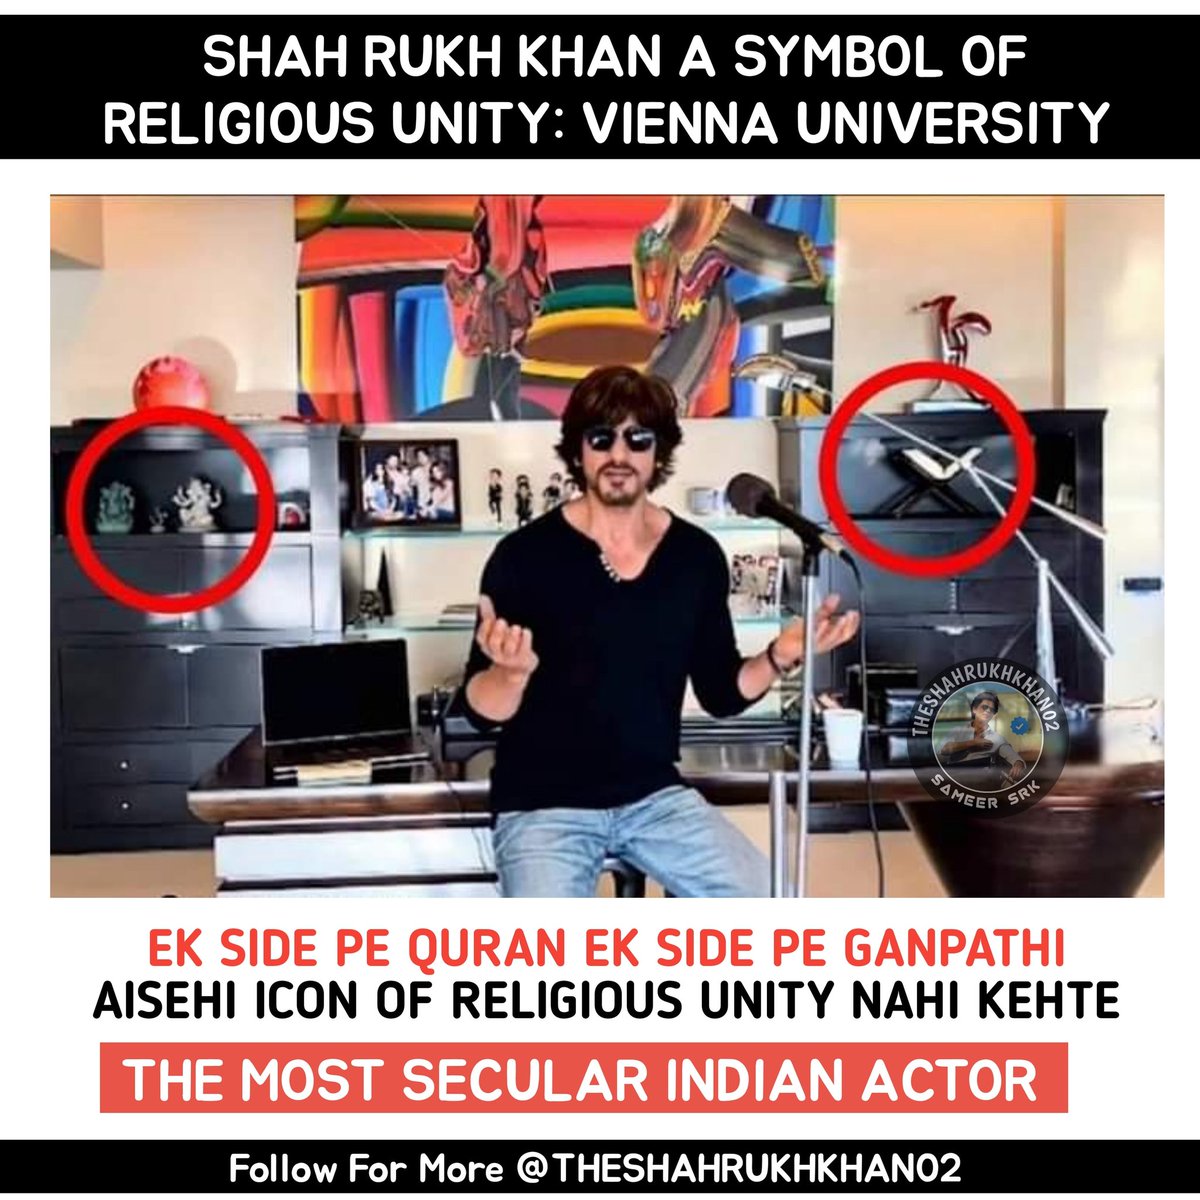 The Most Secular Indian Actor ❤️
@iamsrk #IForIndia